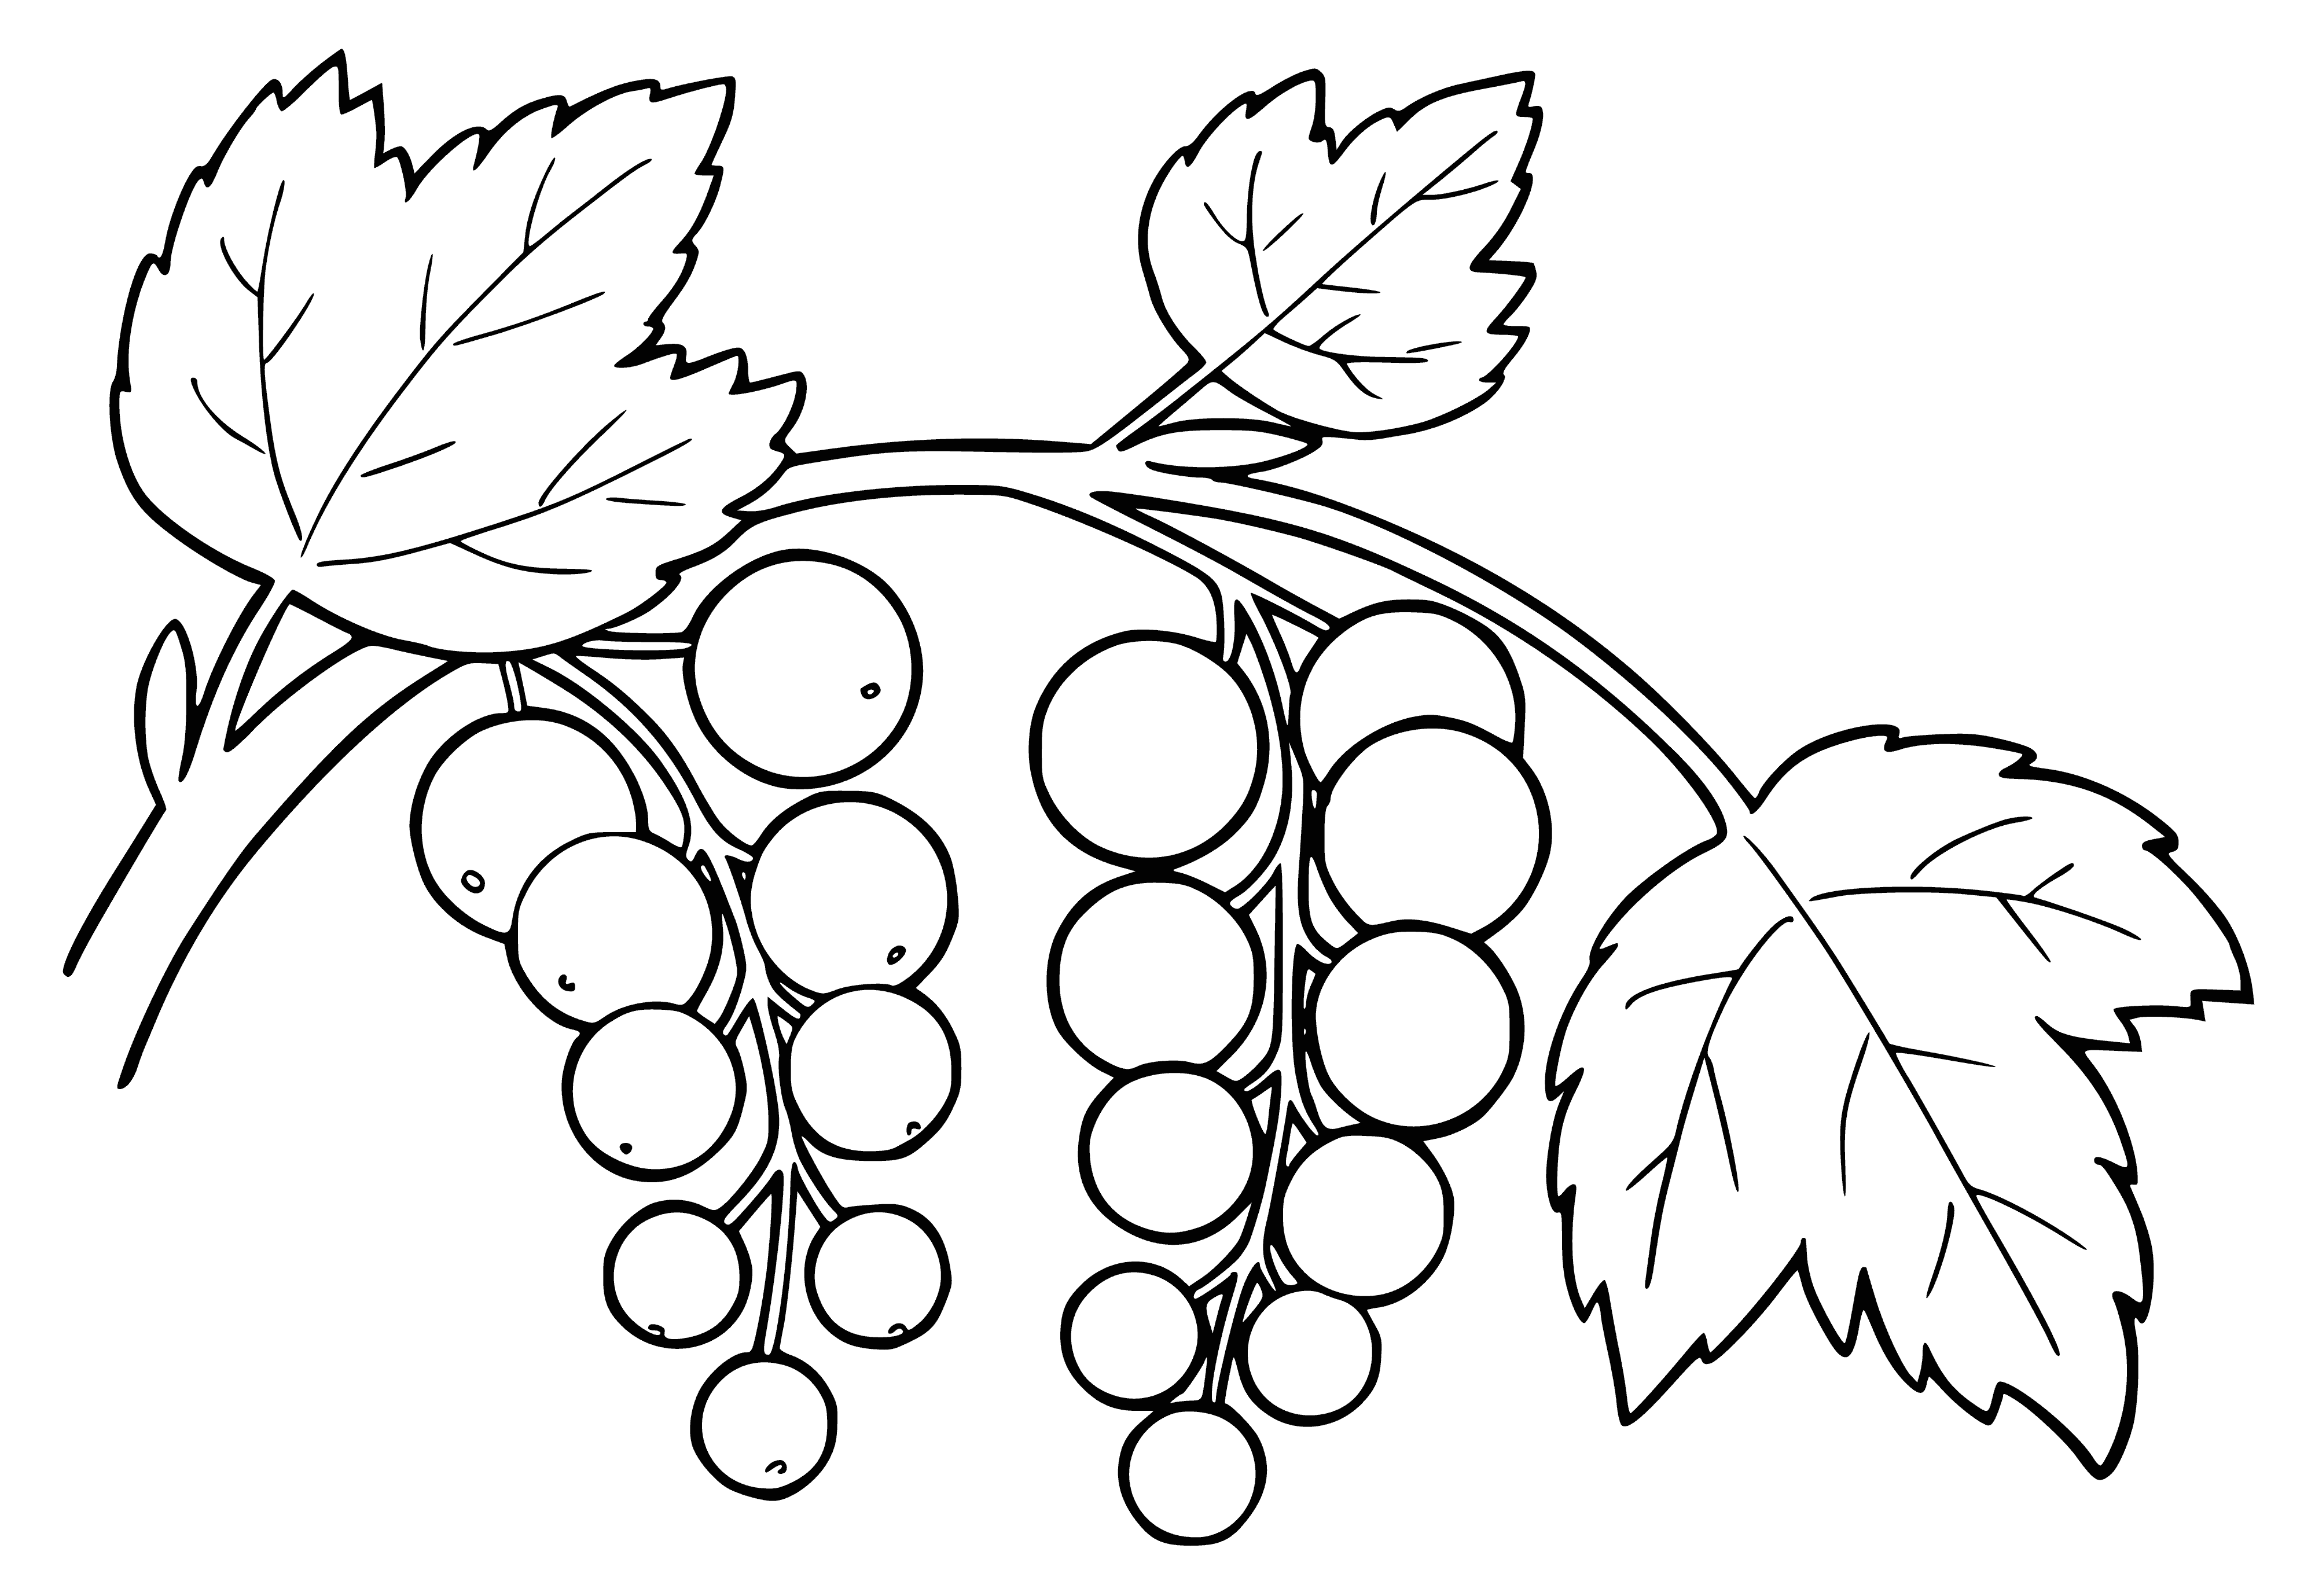 coloring page: The Currant is a small black berry used in jams and pies, with a slightly tart flavor & grown on bushes. #fruit